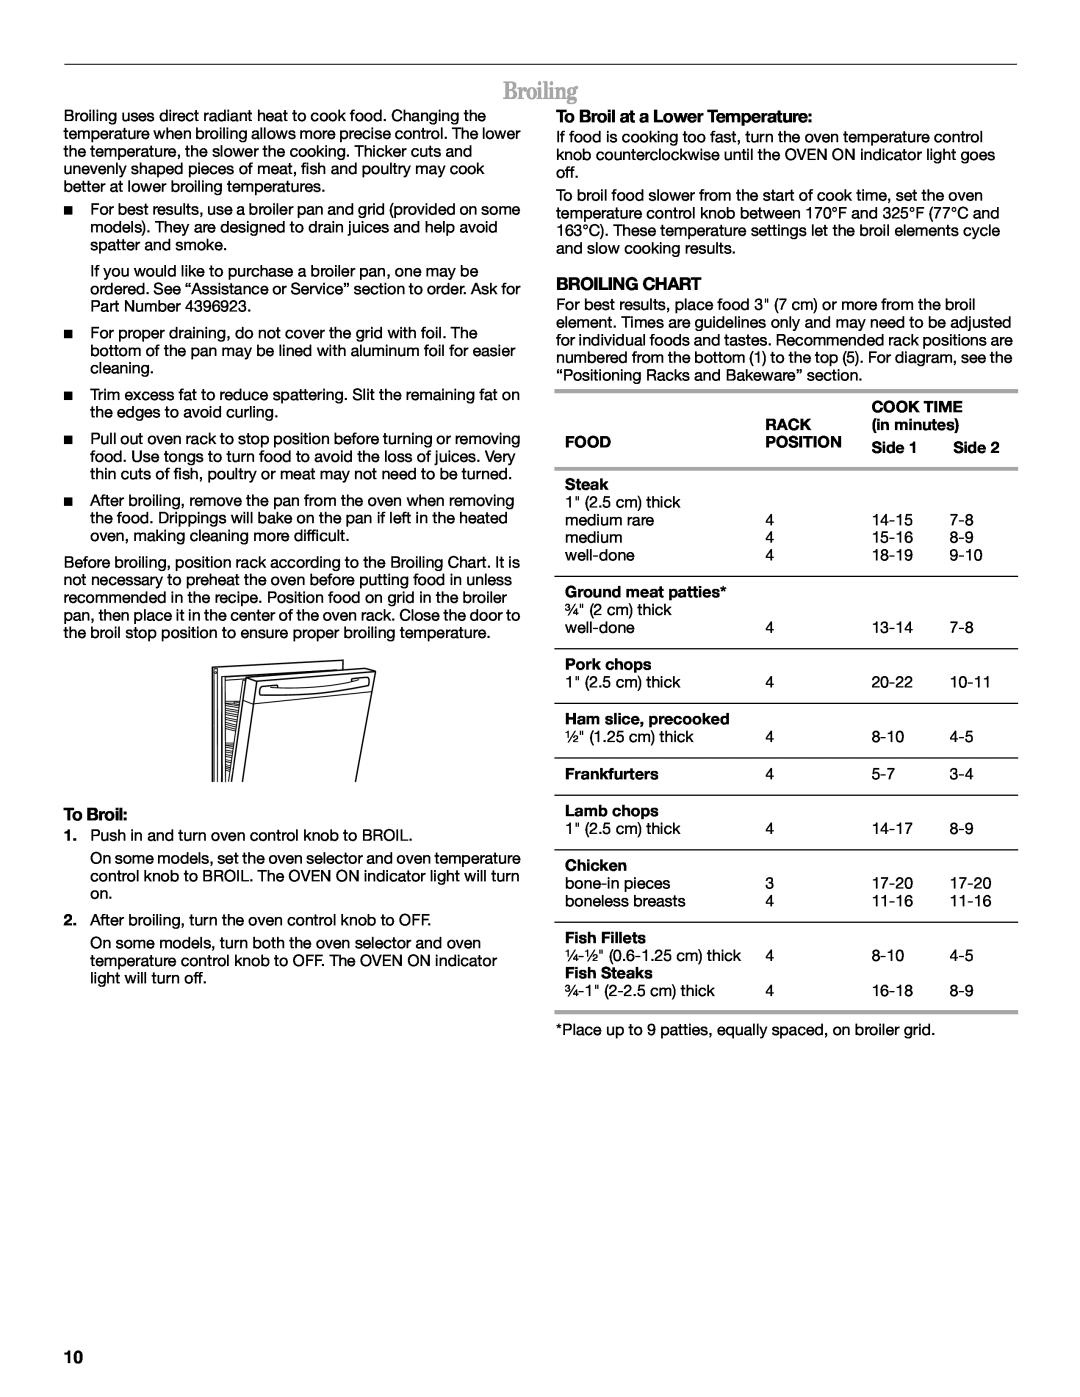 Whirlpool RF3020XKQ5, W10017640 manual To Broil at a Lower Temperature, Broiling Chart 